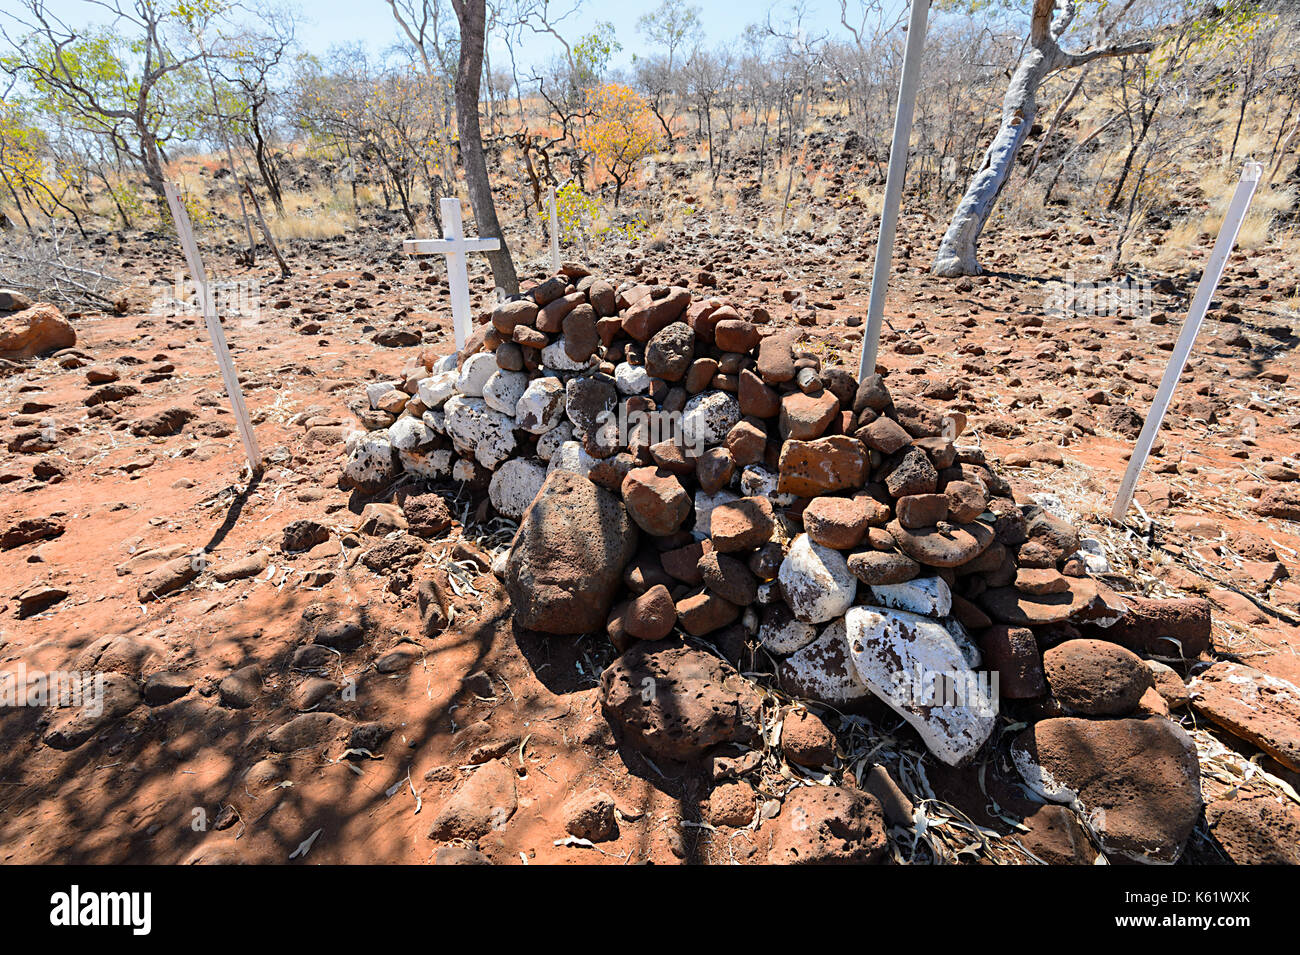 Mailman Corbett's lone grave in the Outback near Porcupine Gorge National Park, Queensland, QLD, Australia Stock Photo